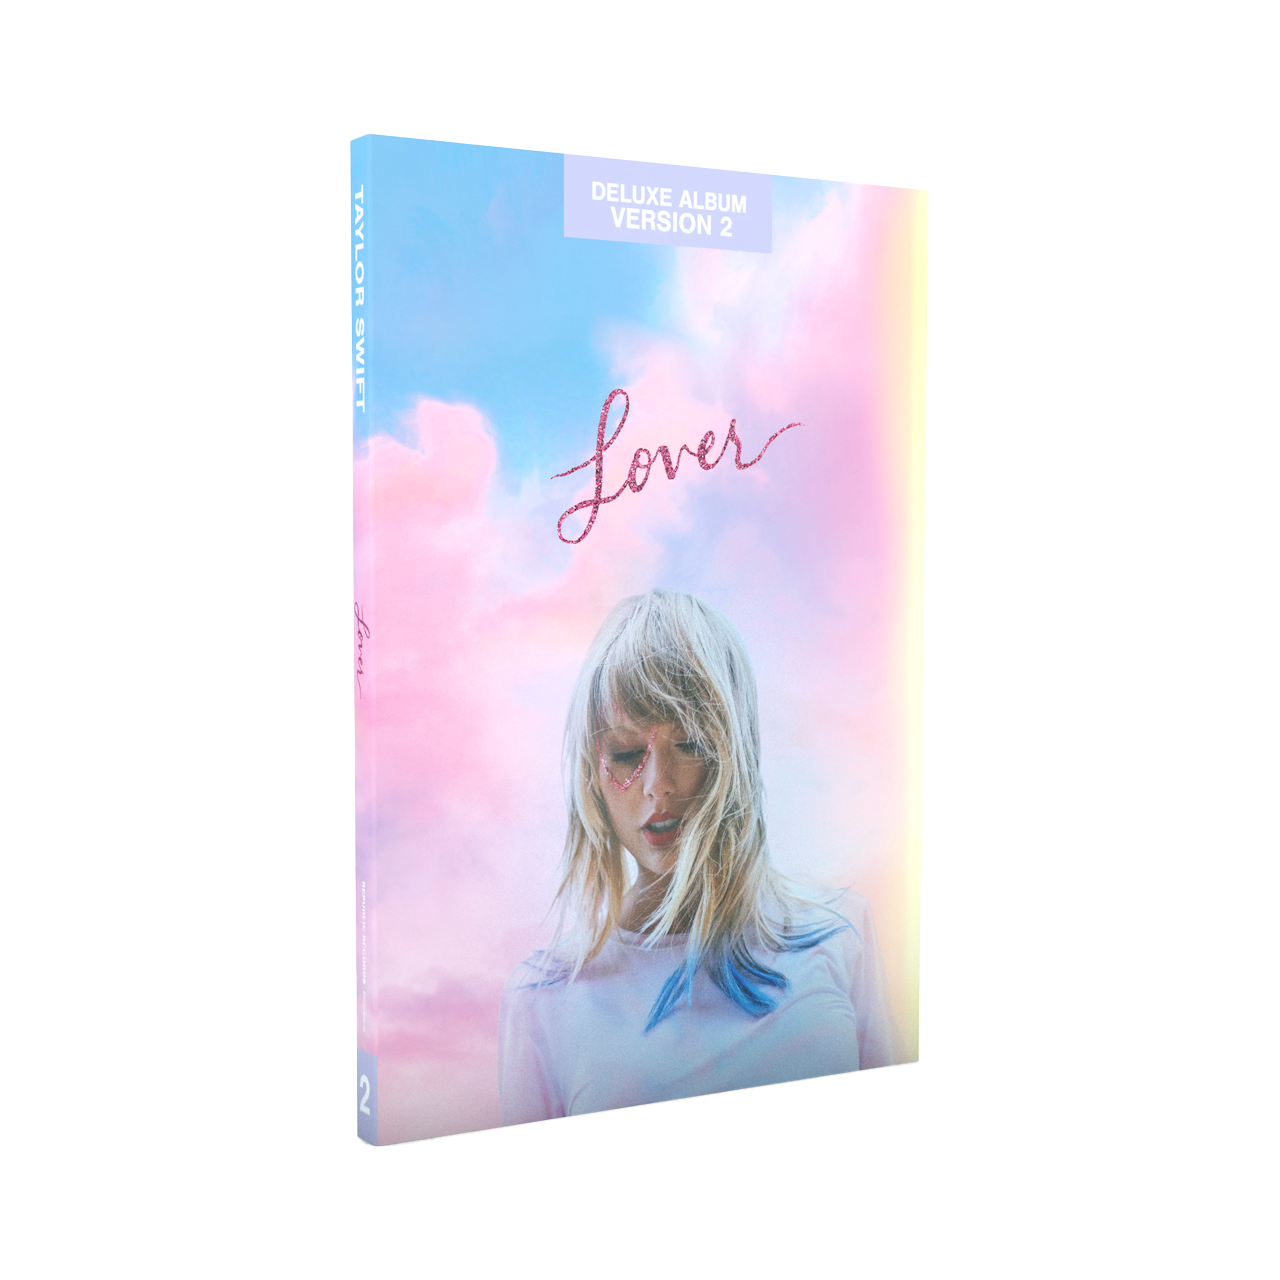 Lover CD Deluxe Version 2 Front Cover